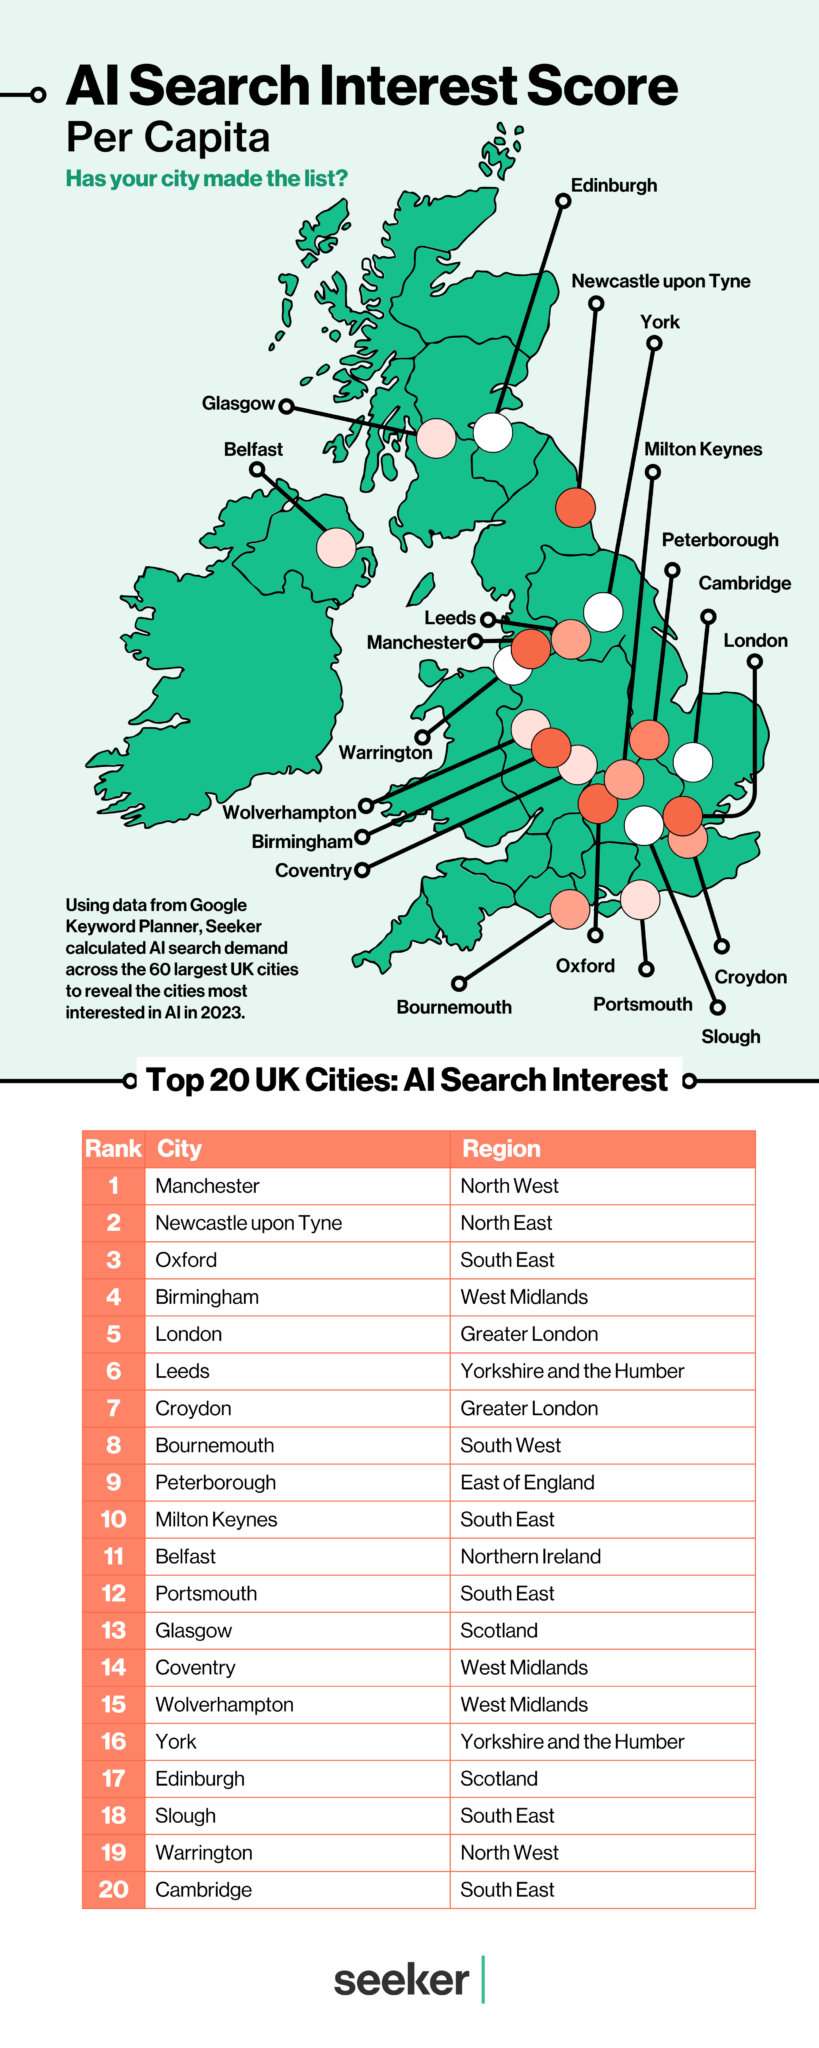 UK map showcasing the top 20 cities most interested in AI based on AI search interest data per capita gathered and analysed by Seeker Digital. The image shows a green UK map with orange circles over the top 20 cities, followed by a table listing the 20 featured cities.